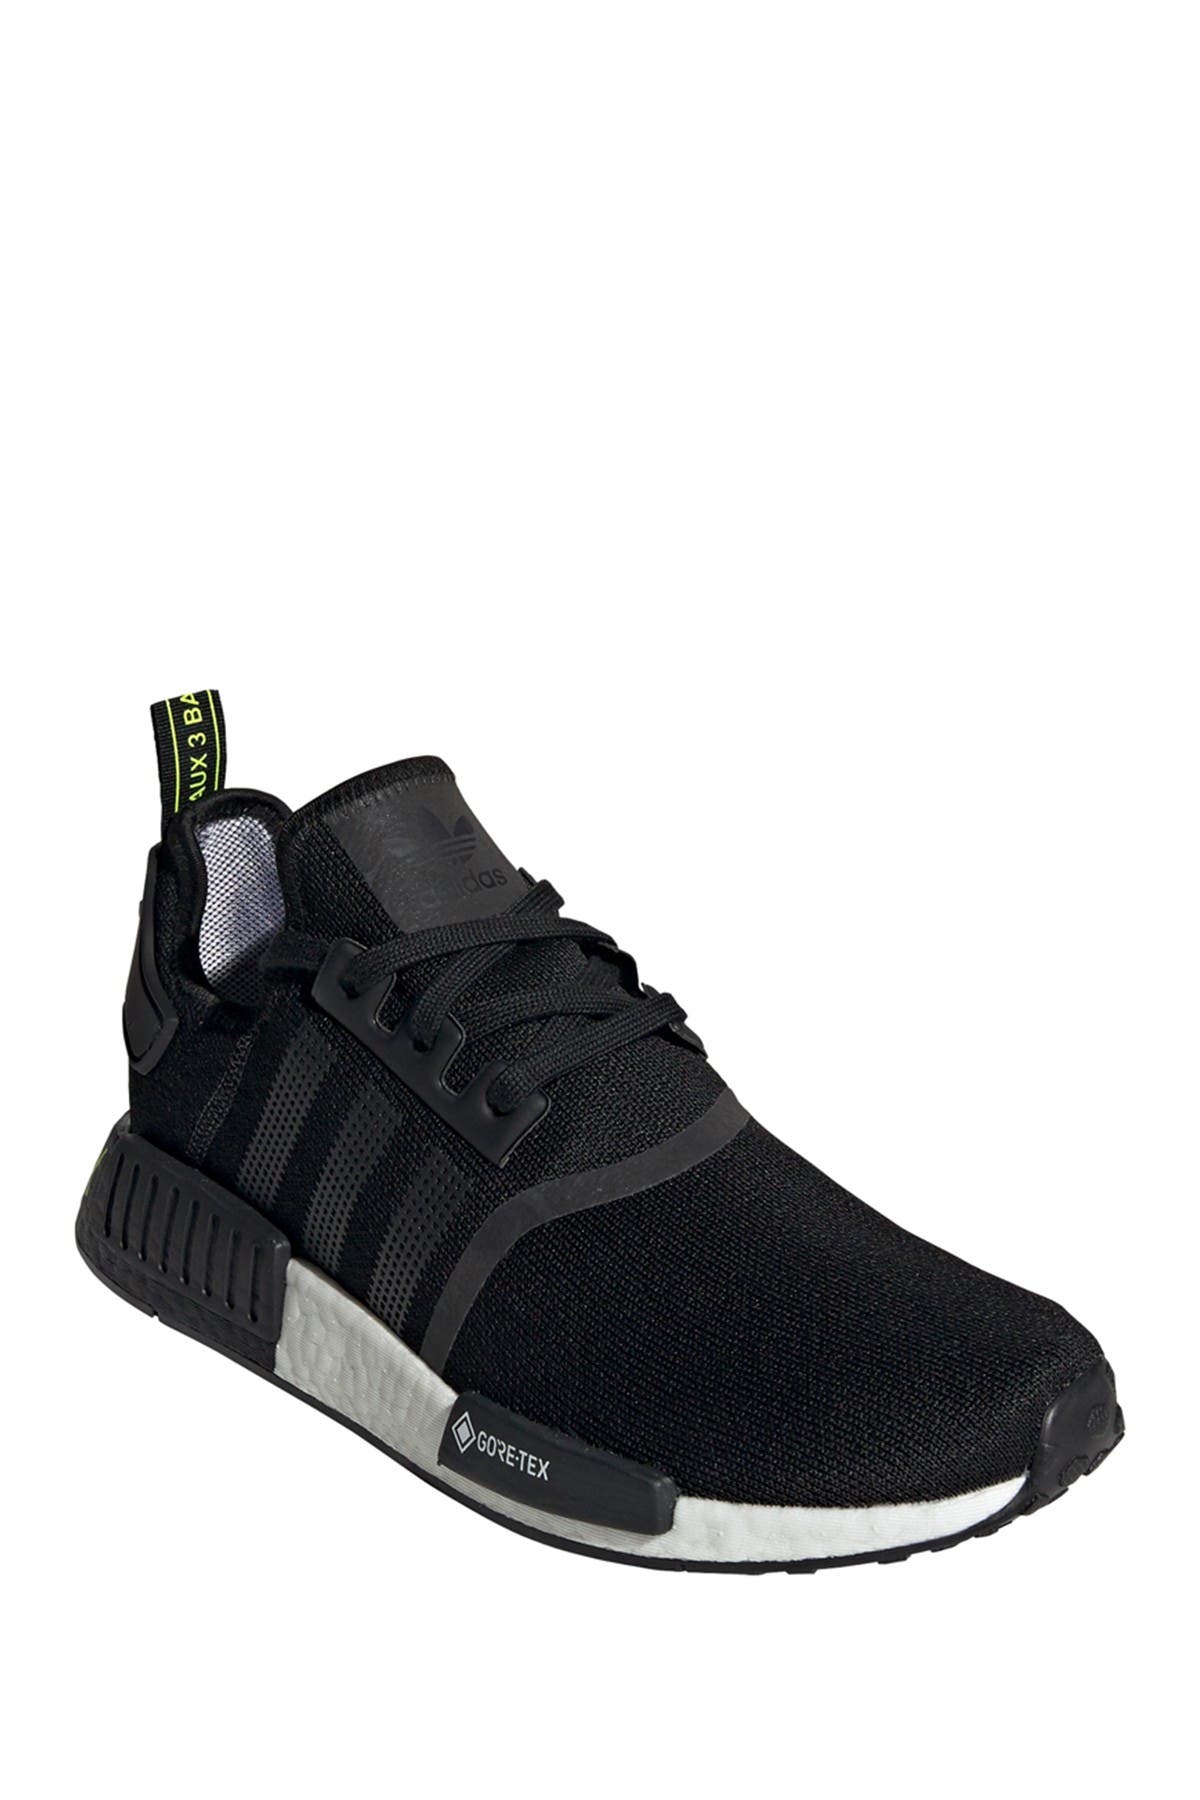 adidas women's nmd r1 knit lace up sneakers